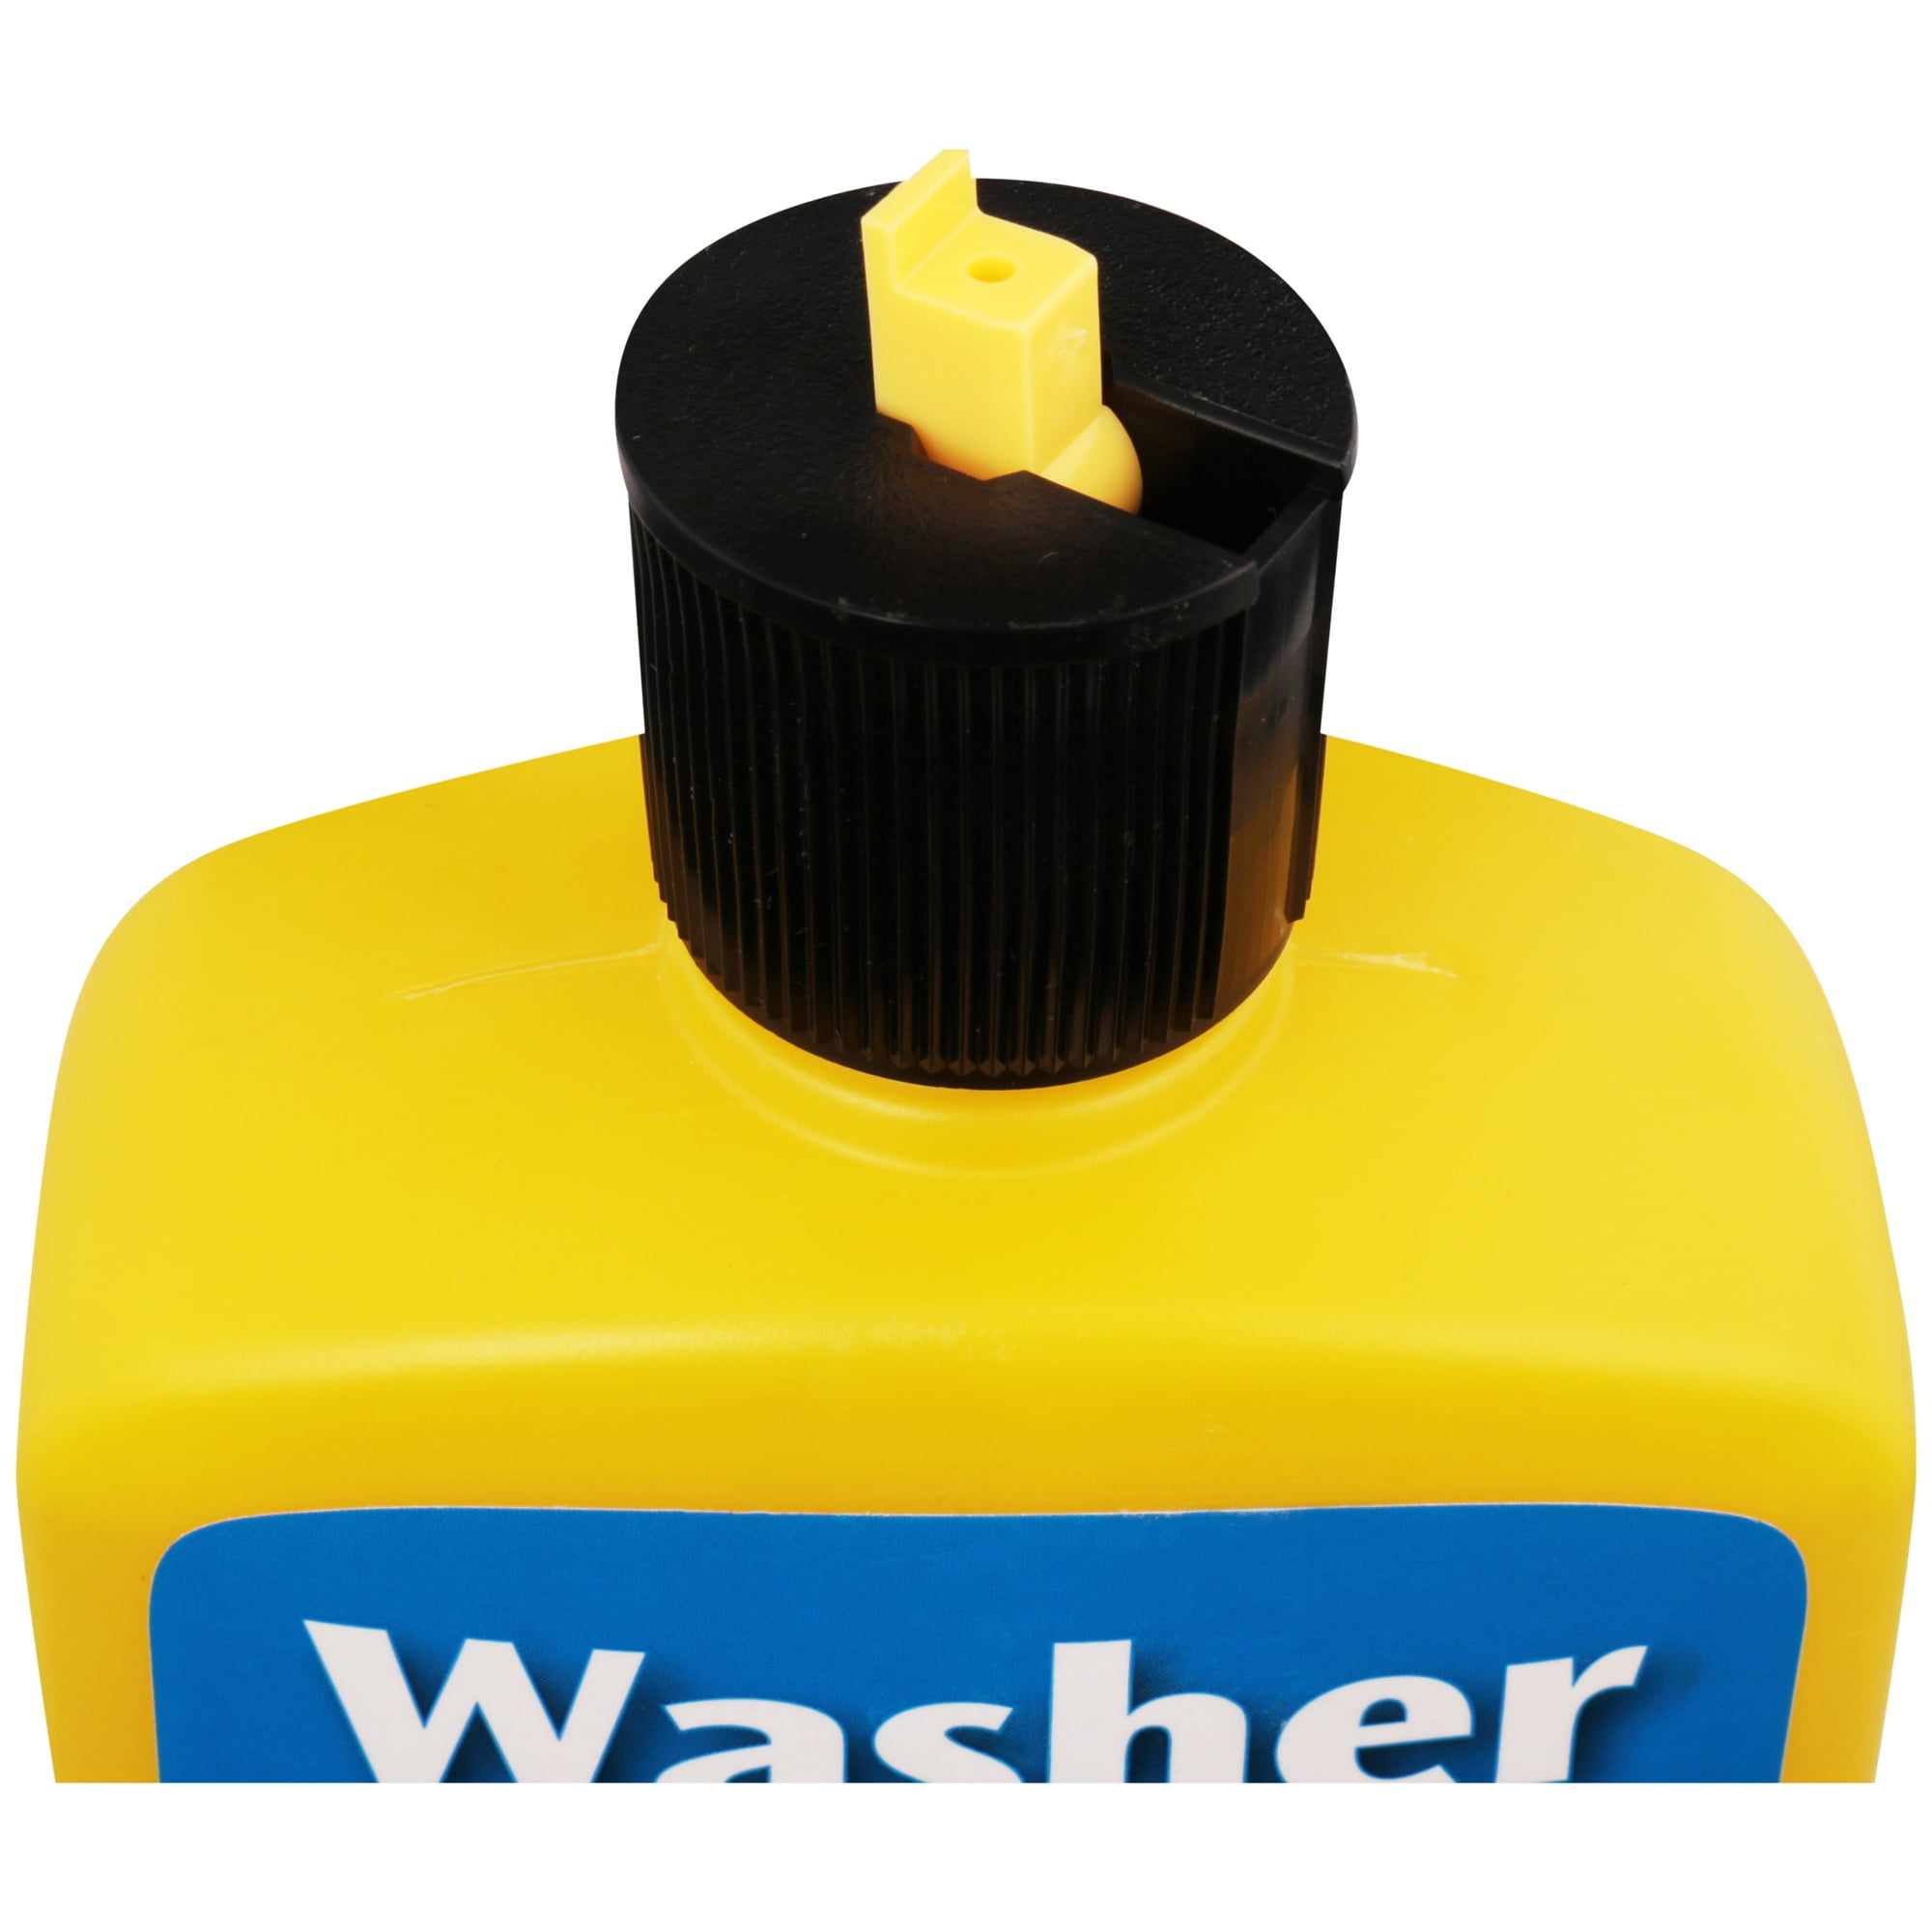 RainX Washer Fluid Additive Review (Tagalog) 